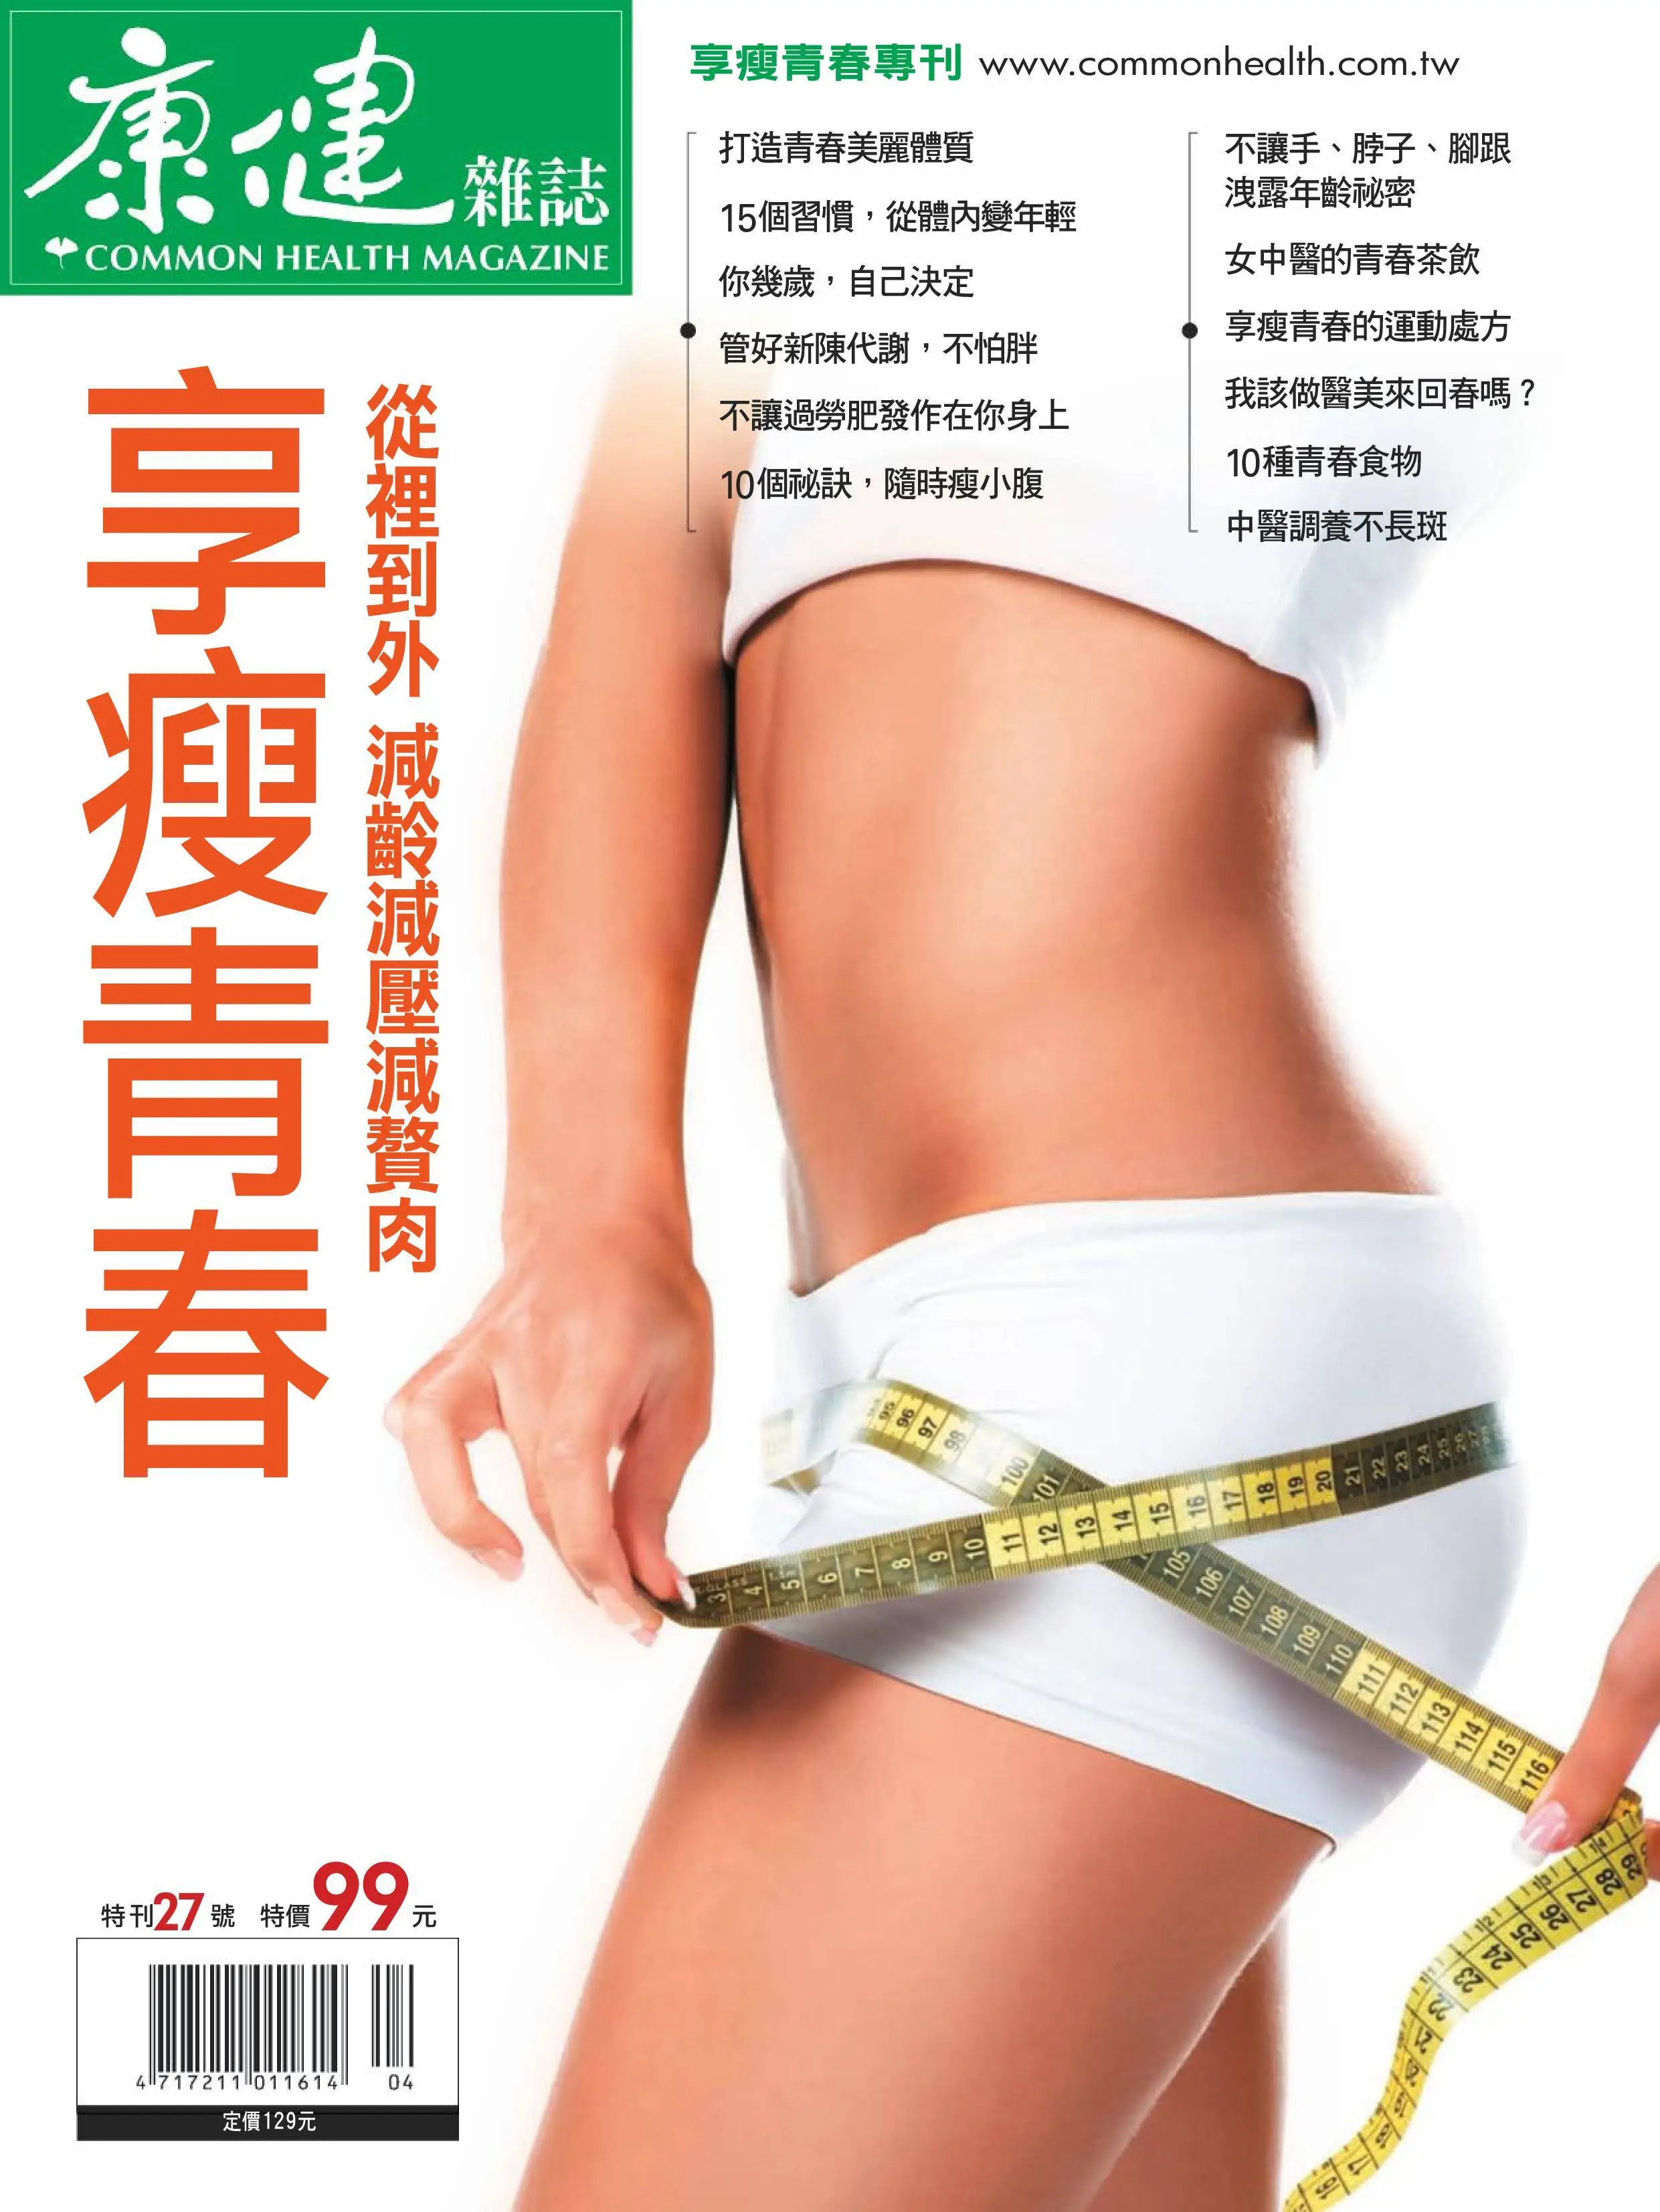 Common Health Special Issue 康健雜誌 享瘦青春專刊27號 2012年4月15日